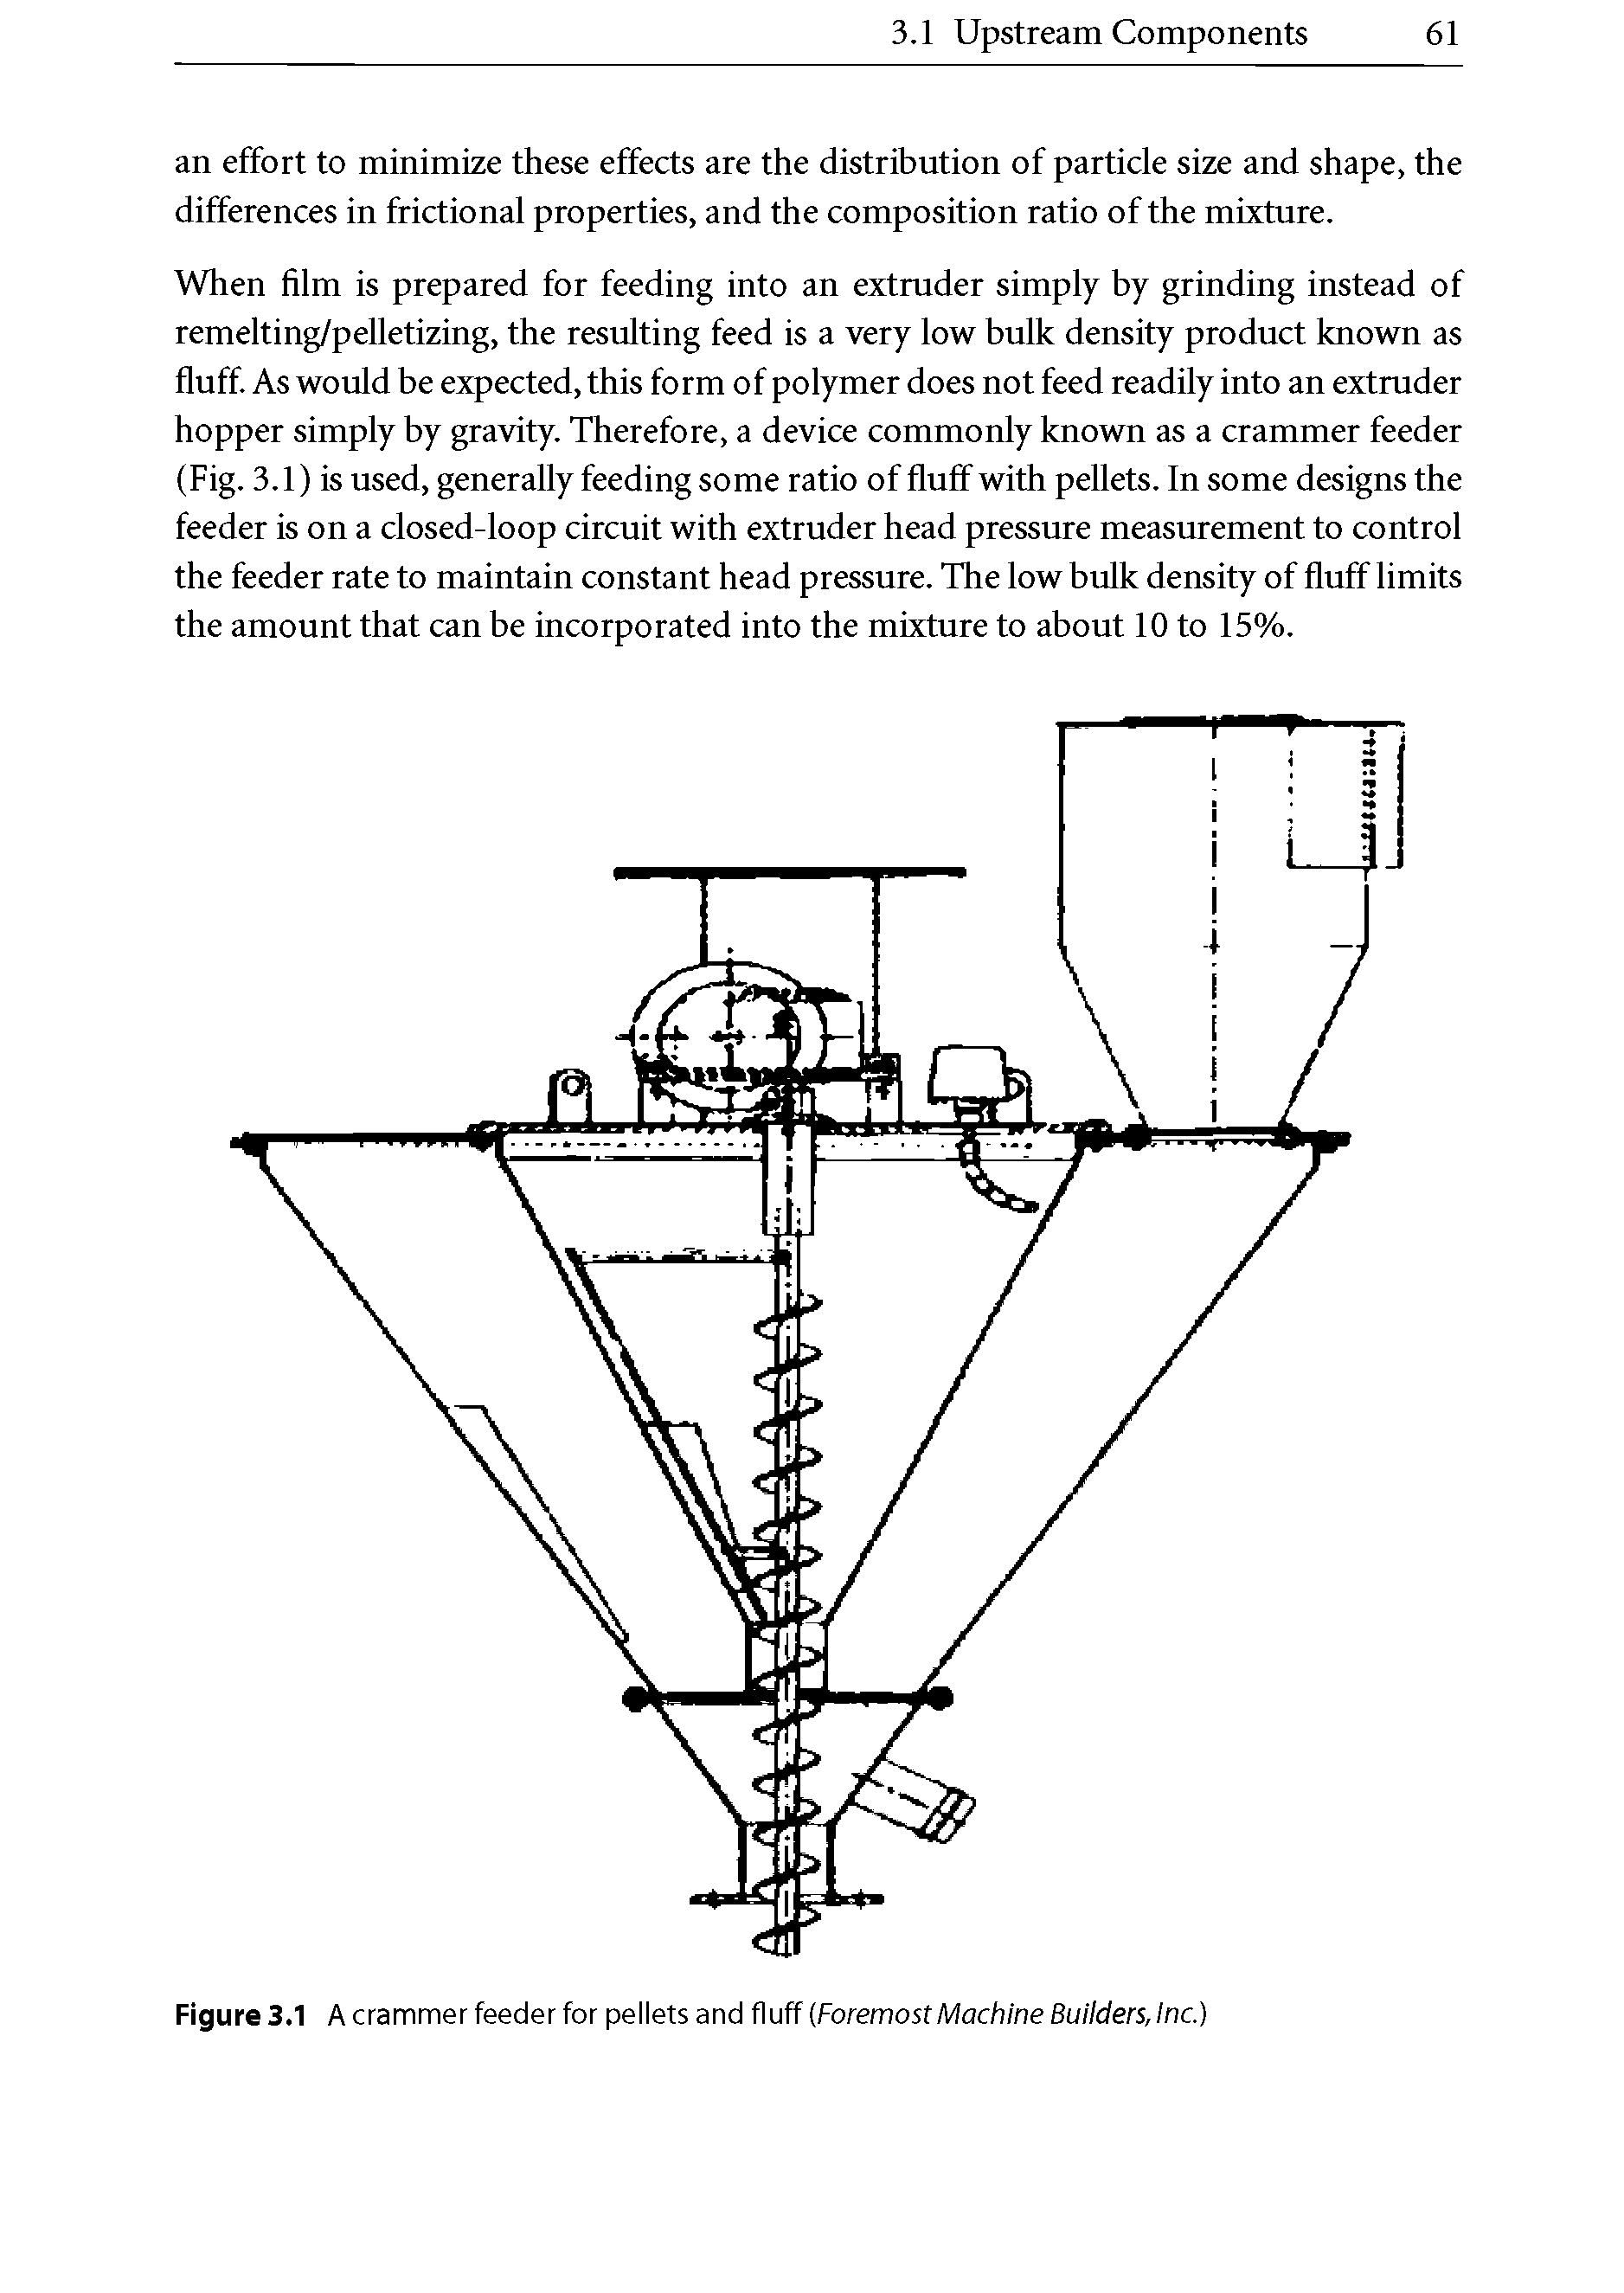 Figure 3.1 A crammer feeder for pellets and fluff (Foremost Machine Builders, Inc.)...